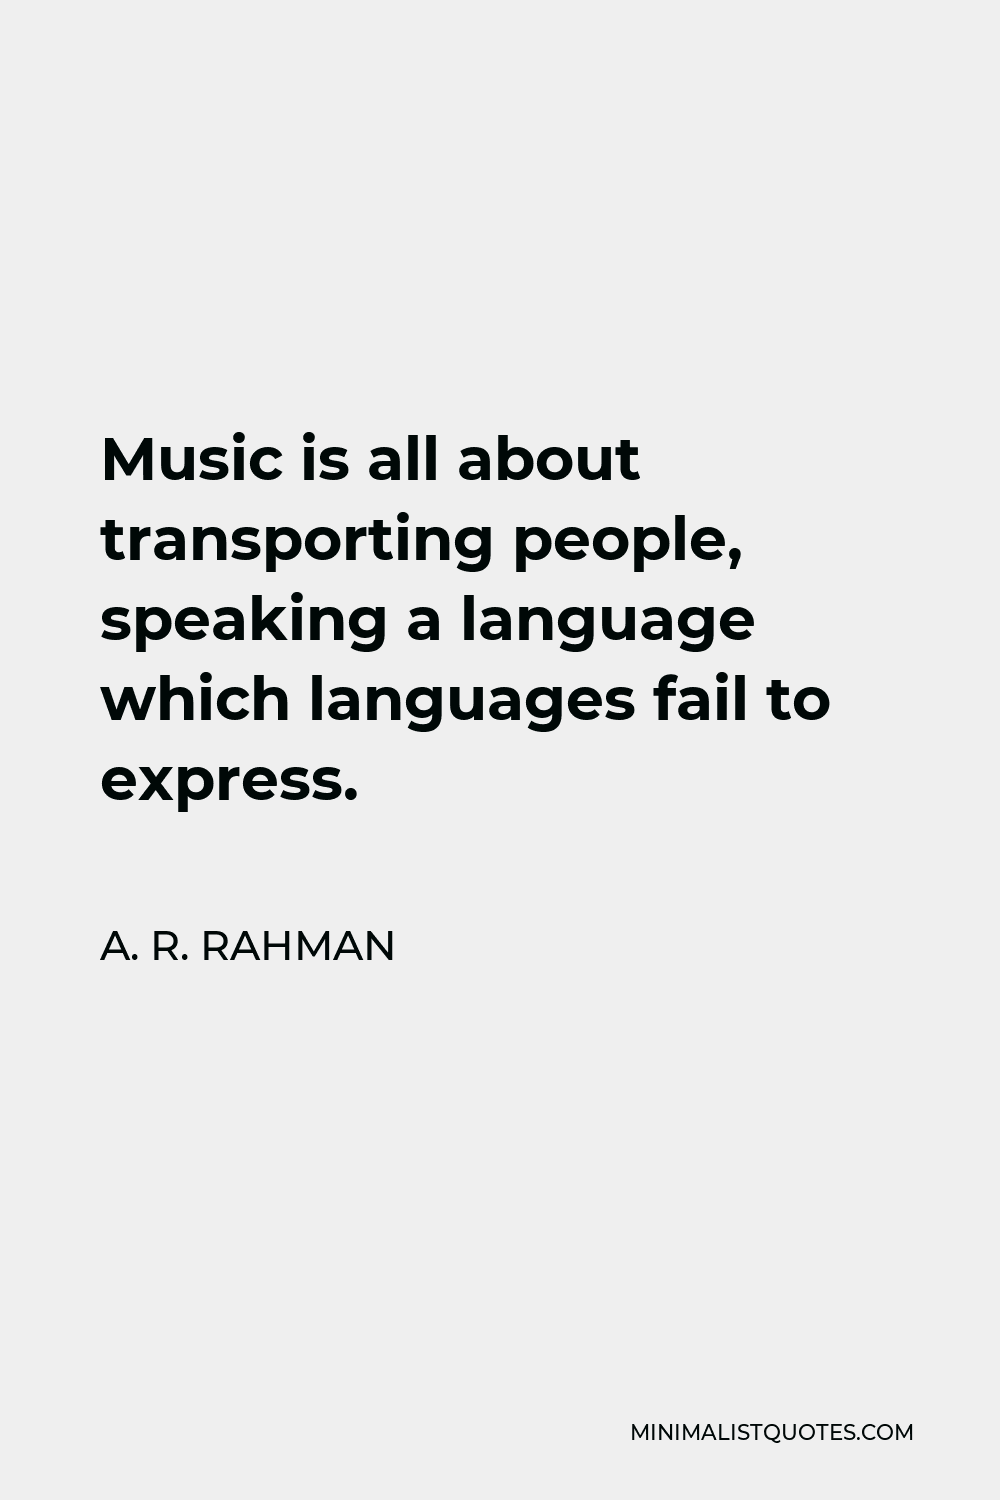 A. R. Rahman Quote - Music is all about transporting people, speaking a language which languages fail to express.